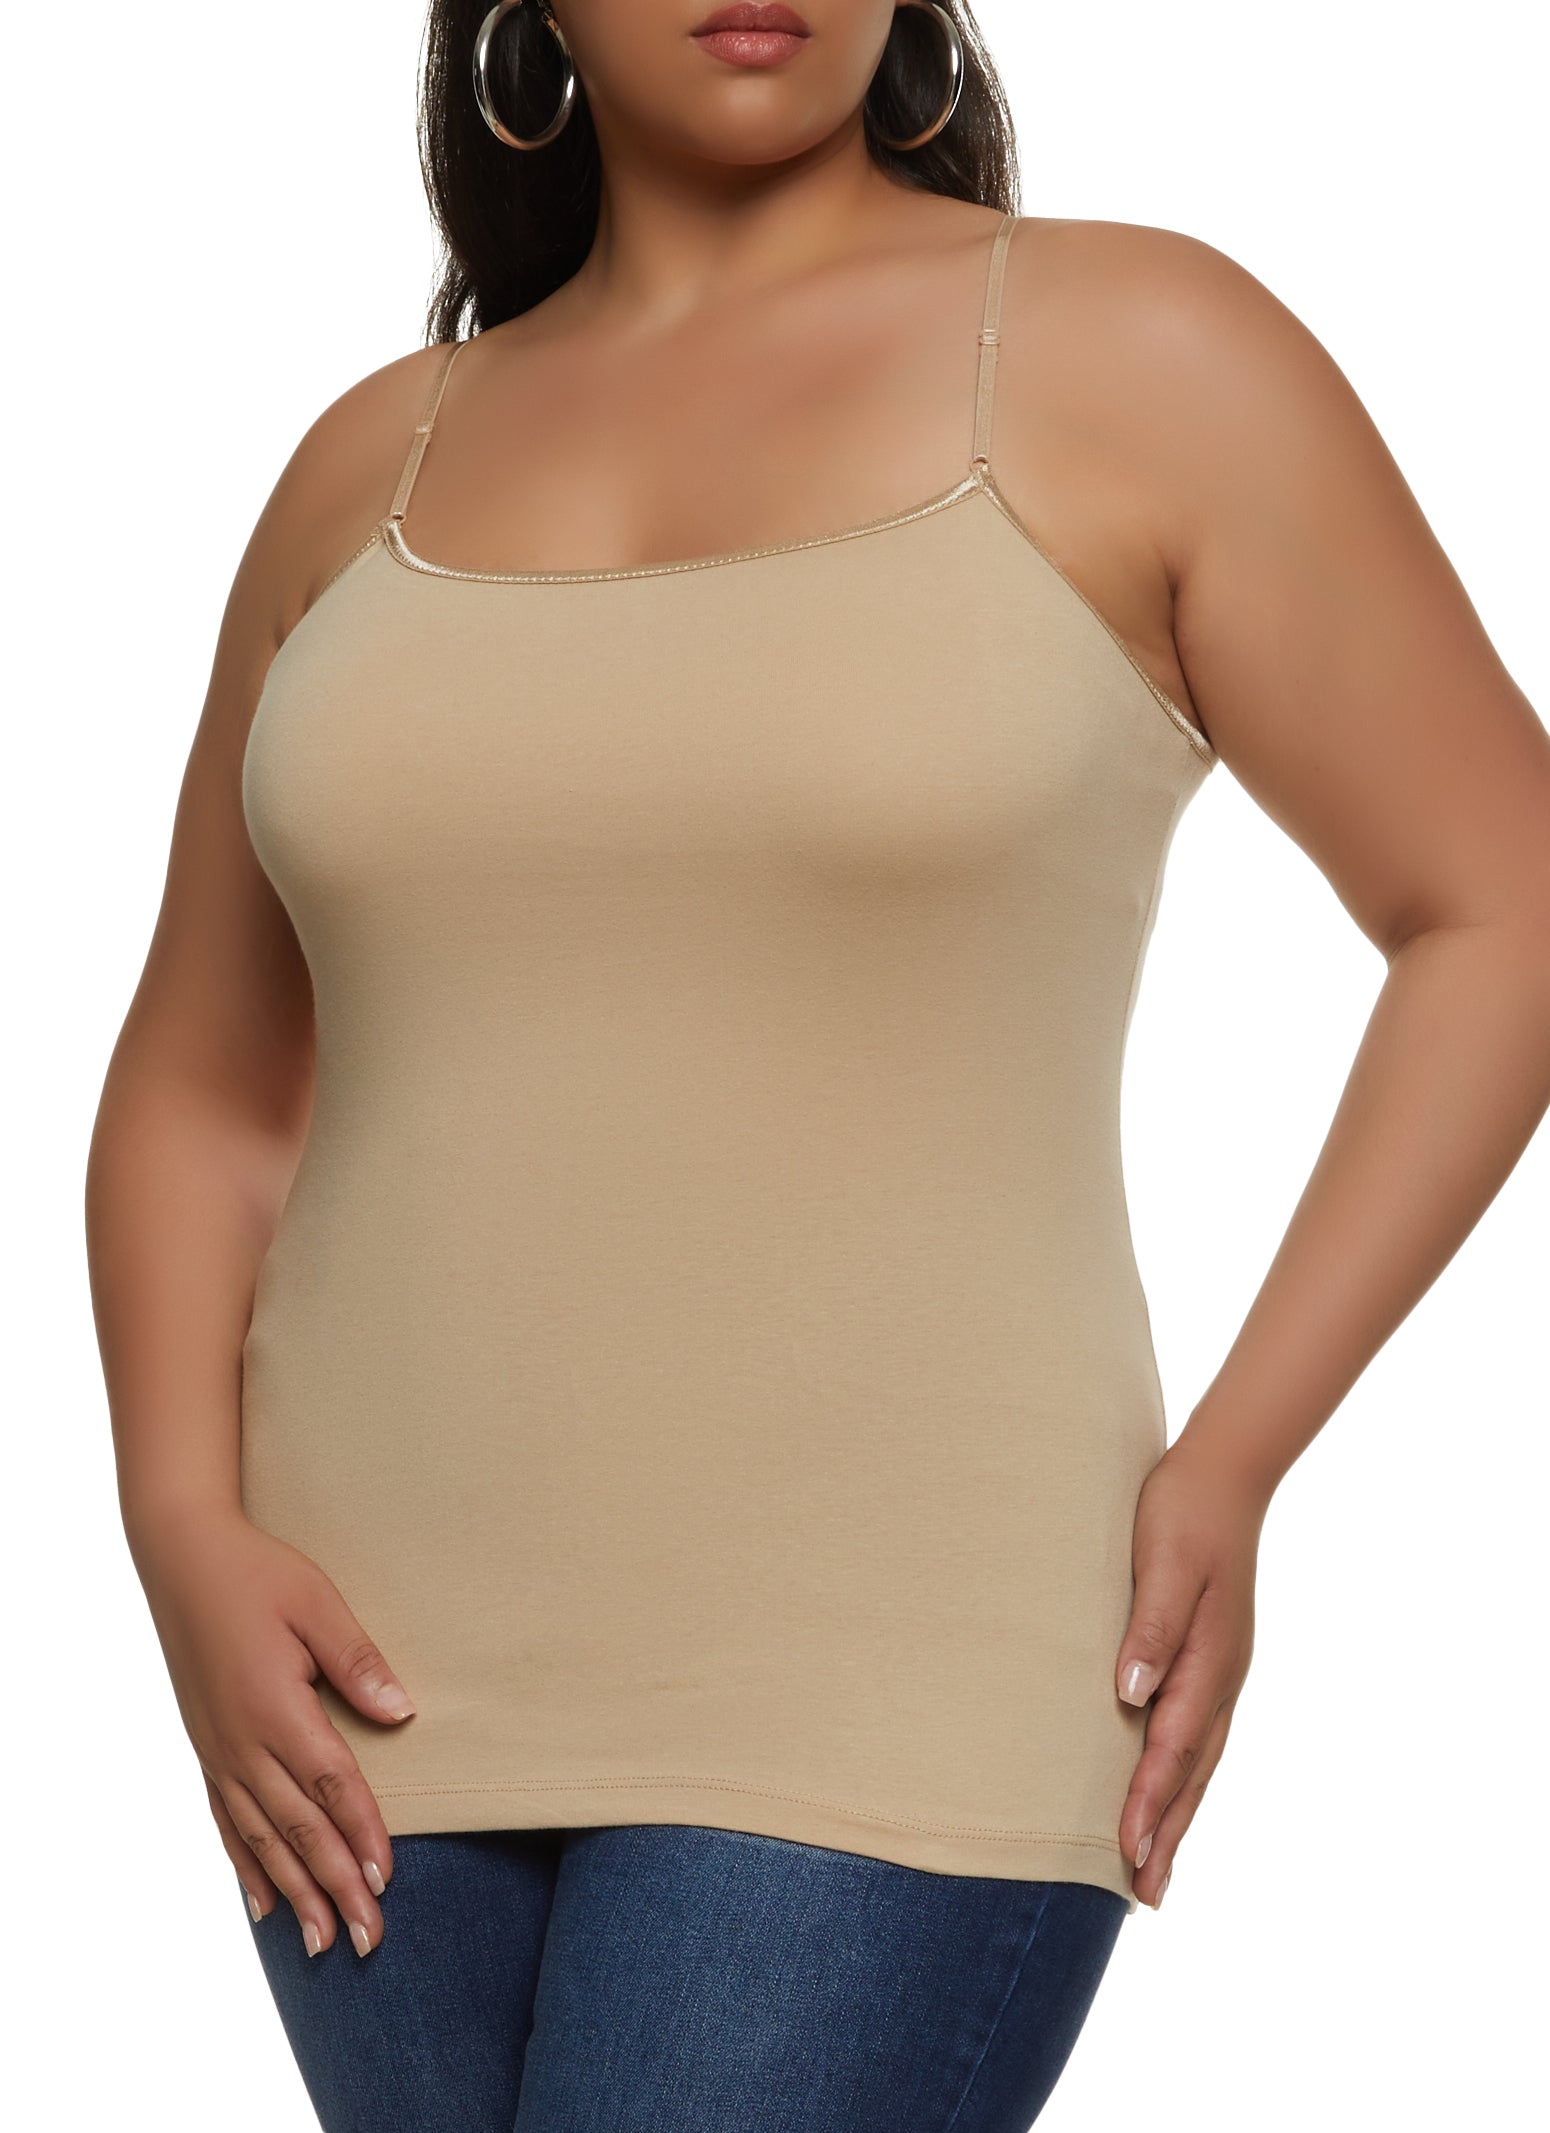 Women's Cotton Camisole with Built in Bra Adjustable Strap Square Neck Tank  Top 